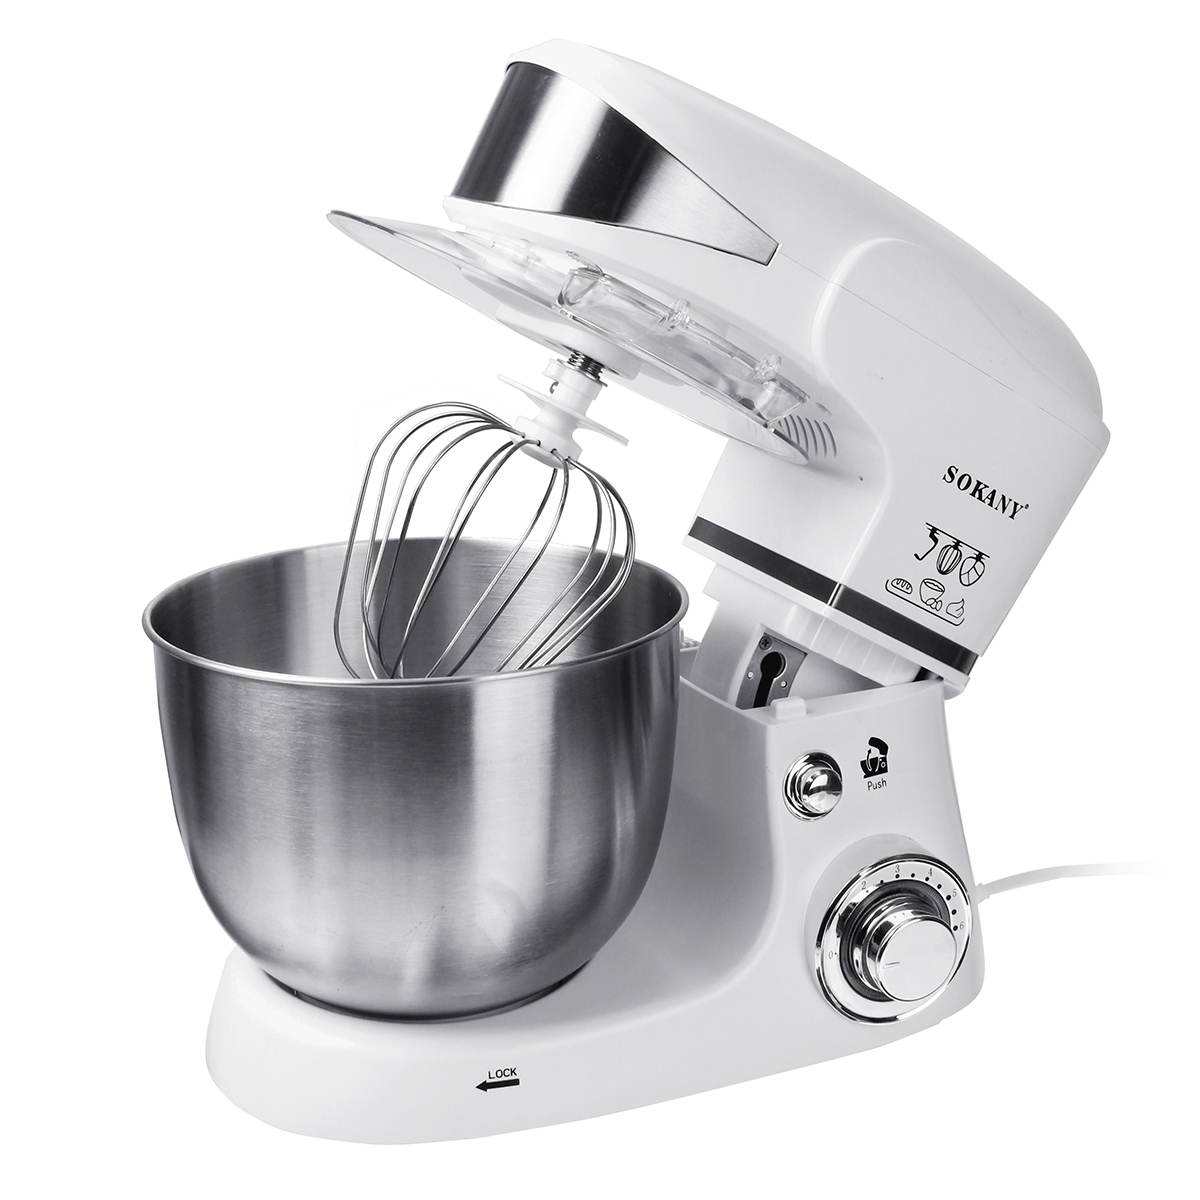 New 5L Electric Food Mixer 1000W 6 speed Stainless Steel Bowl Egg Whisk-Blender Dough Mixer Maker Machine Kitchen Cooking Tools